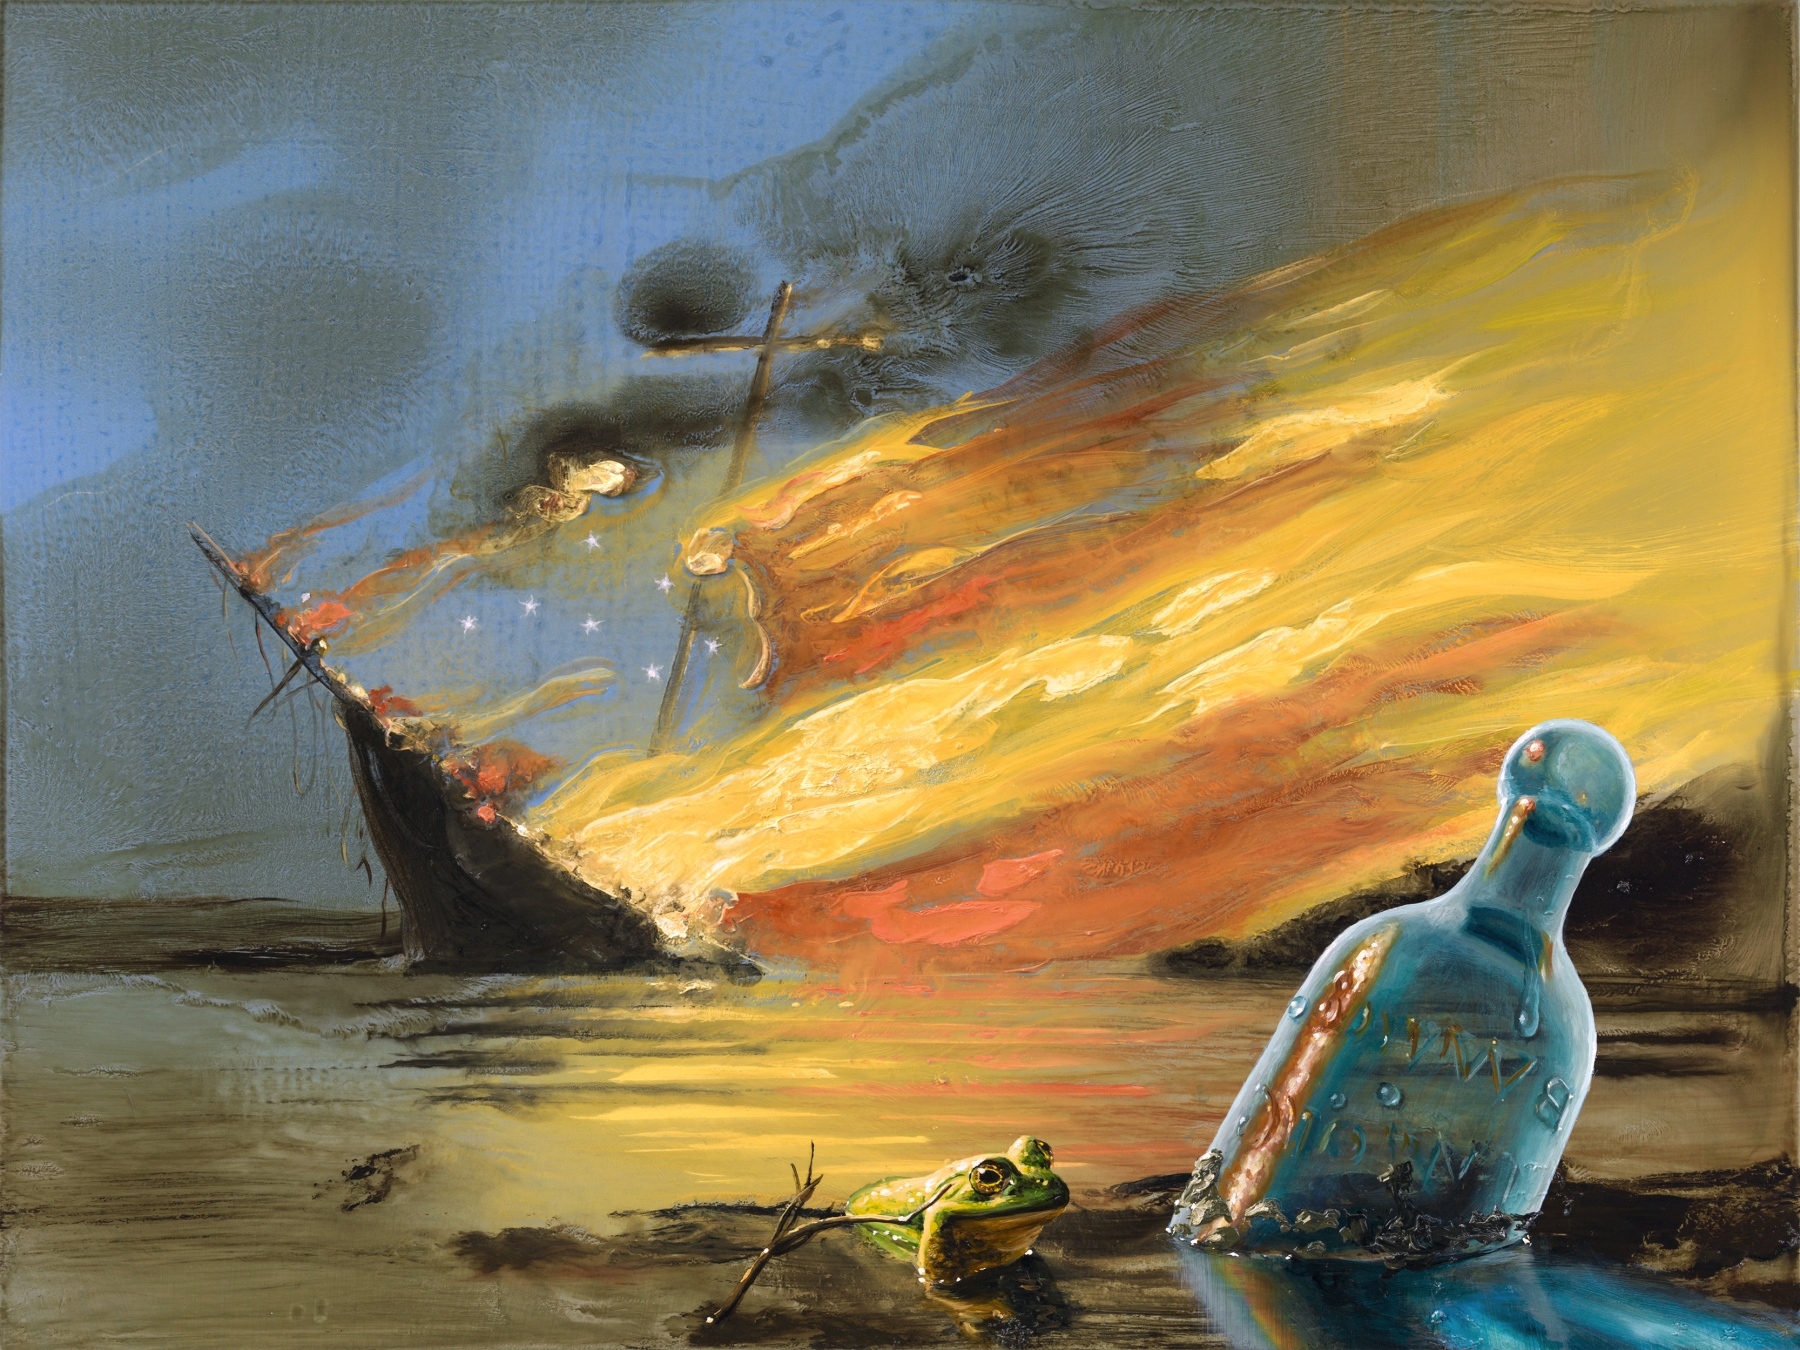 painting with a floating bottle and a frog in the foreground and a sinking ship on fire in the background